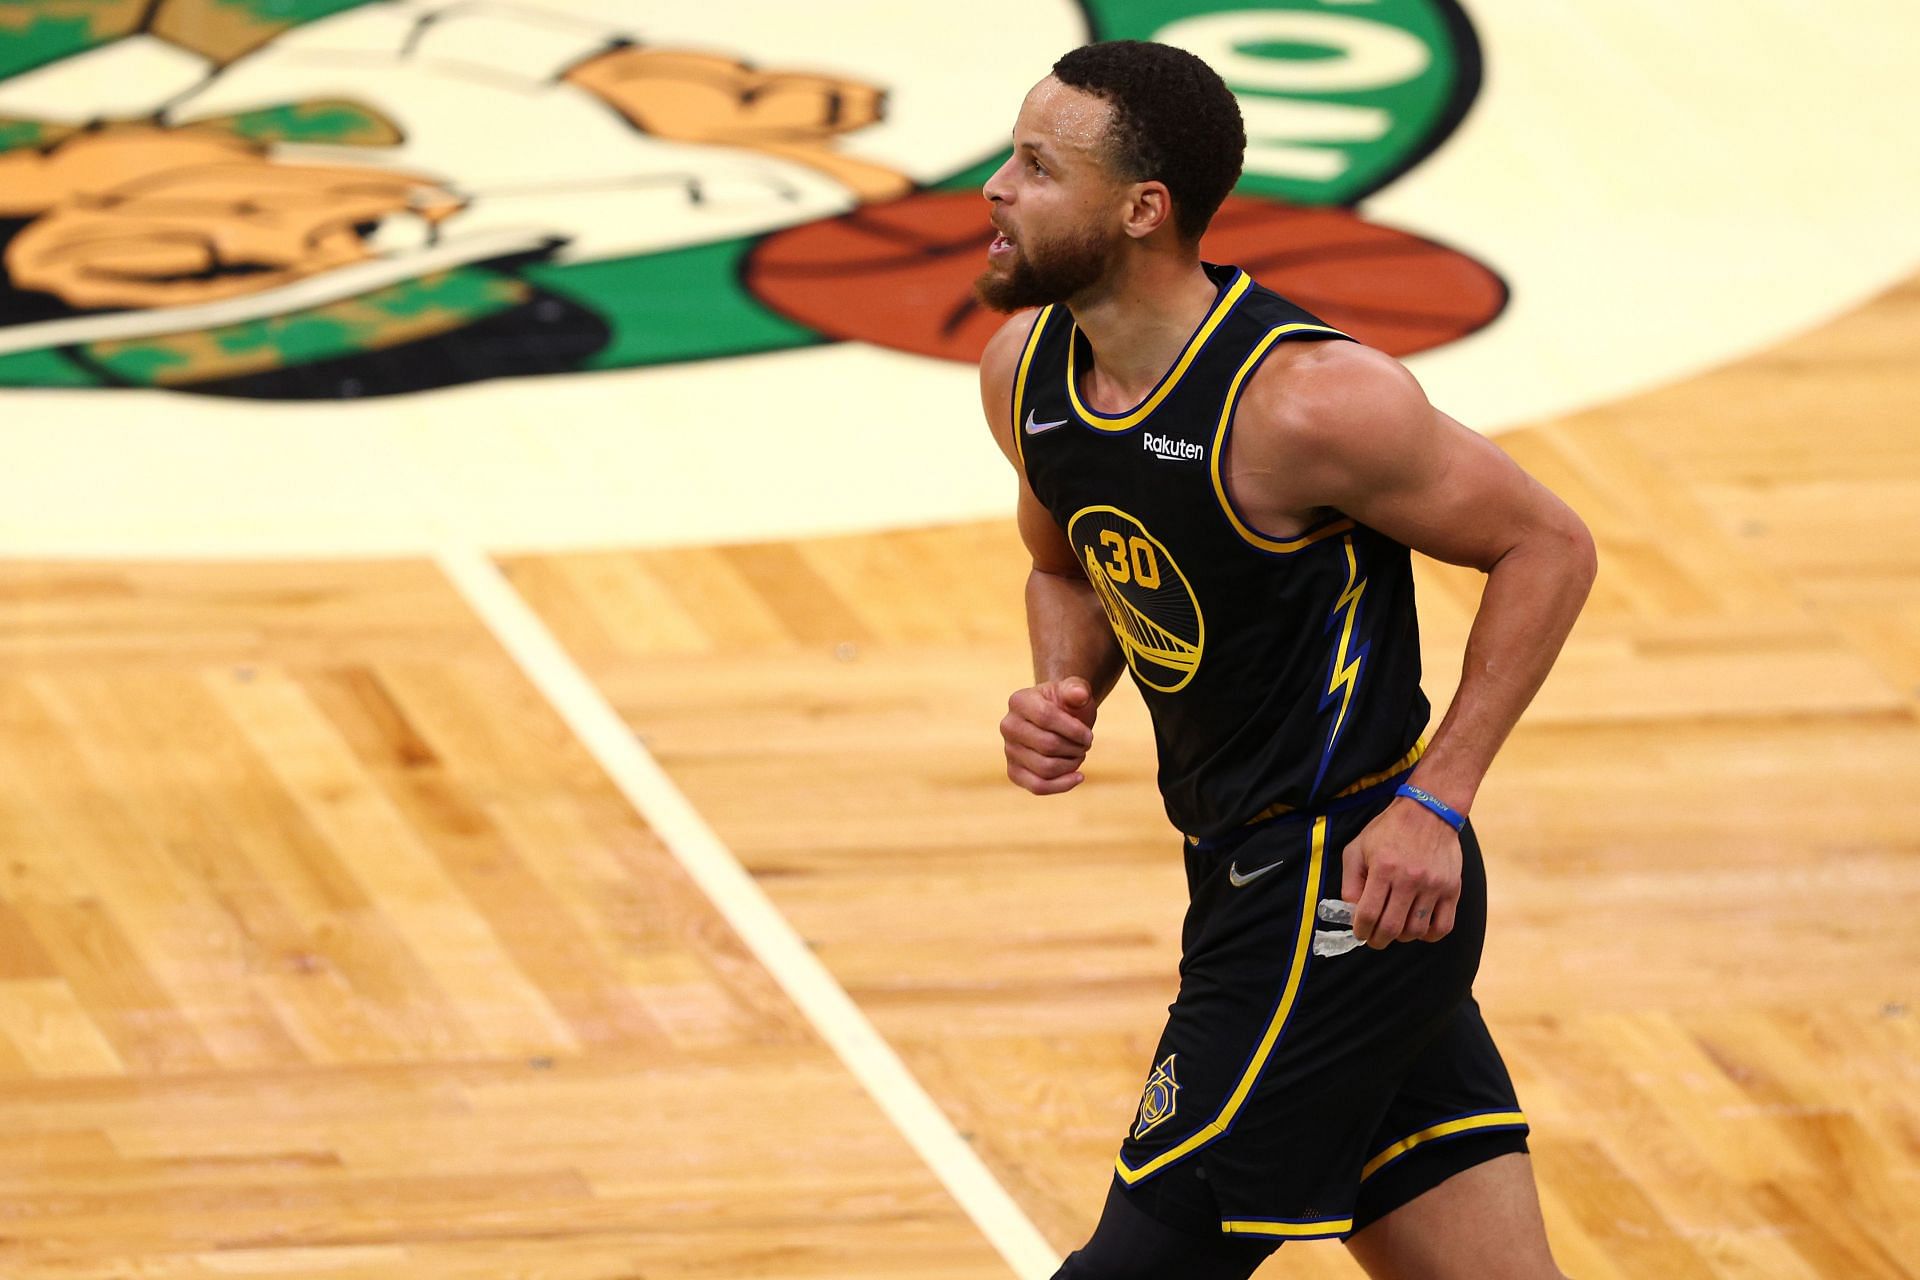 Max Kellerman asserts that Steph Curry should win Finals MVP even if Dubs lose against Celtics